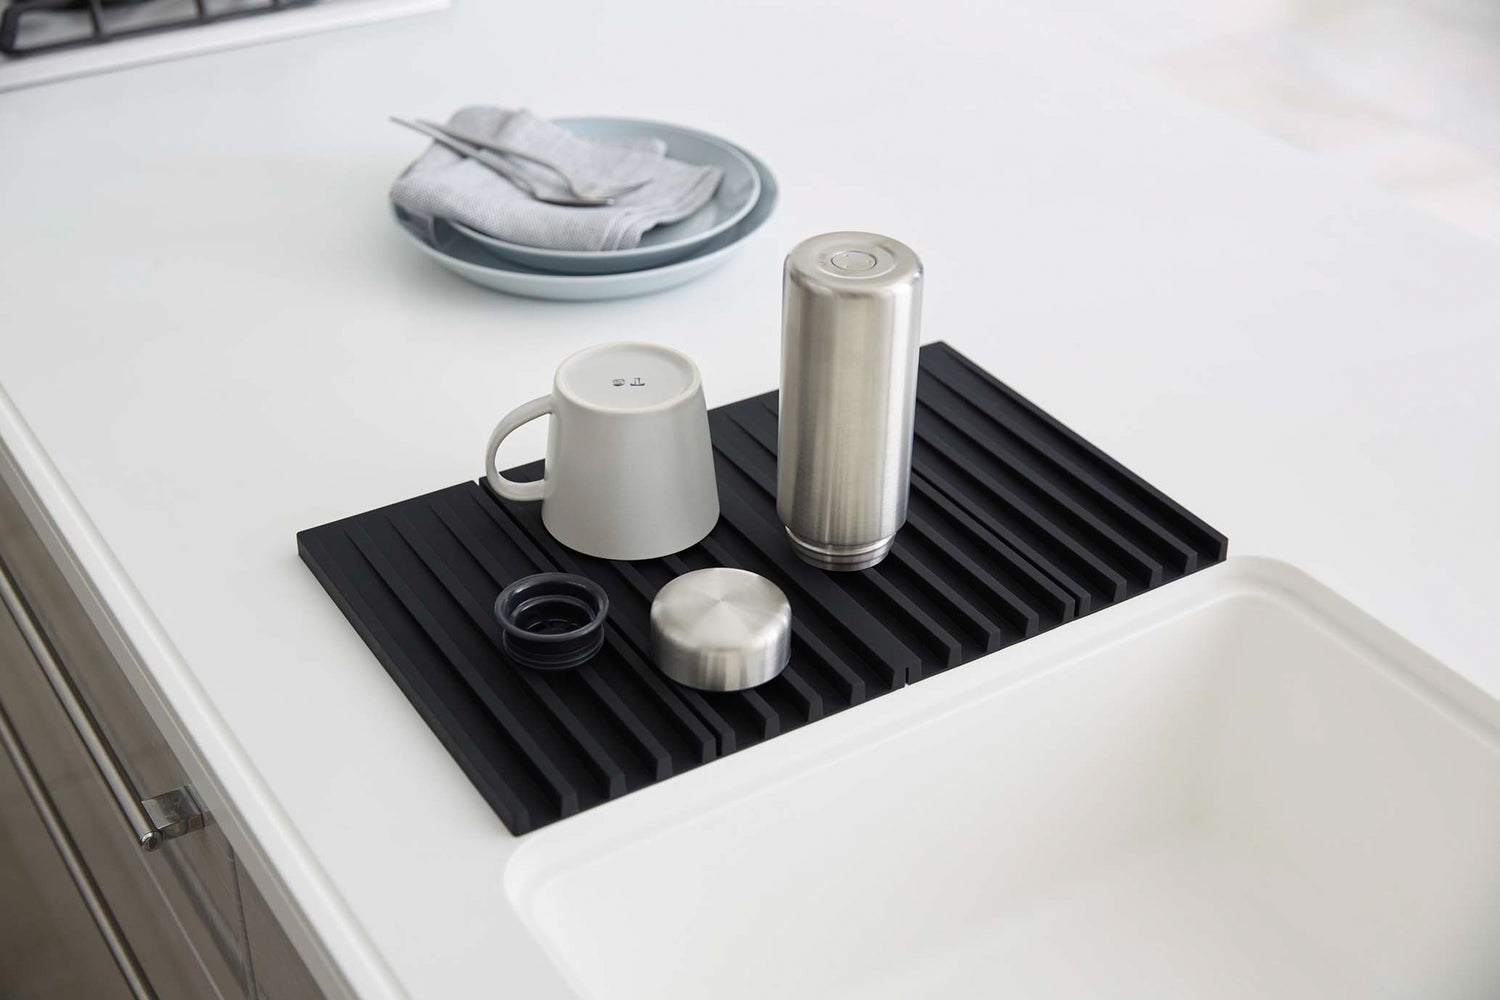 View 10 - Black Folding Dish Drainer Mat holding cup and bottle on sink counter by Yamazaki Home.